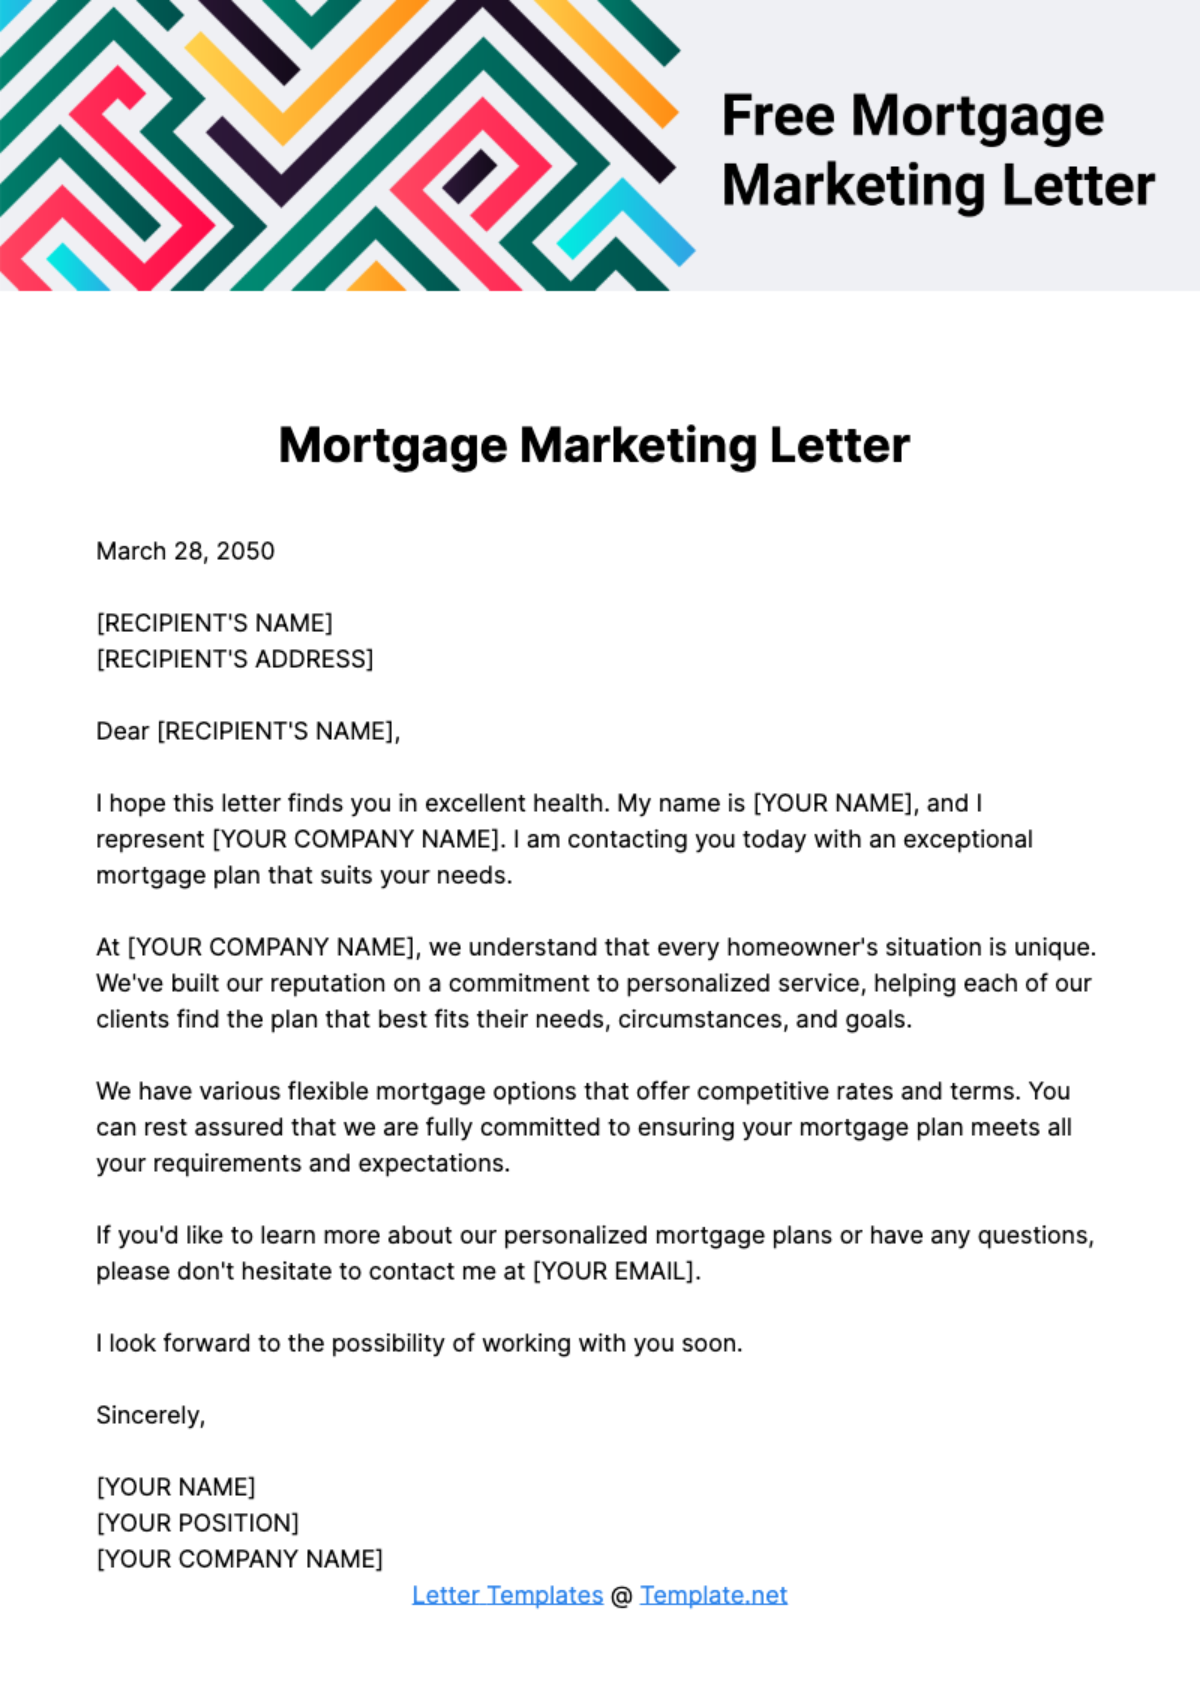 Free Mortgage Marketing Letter Template